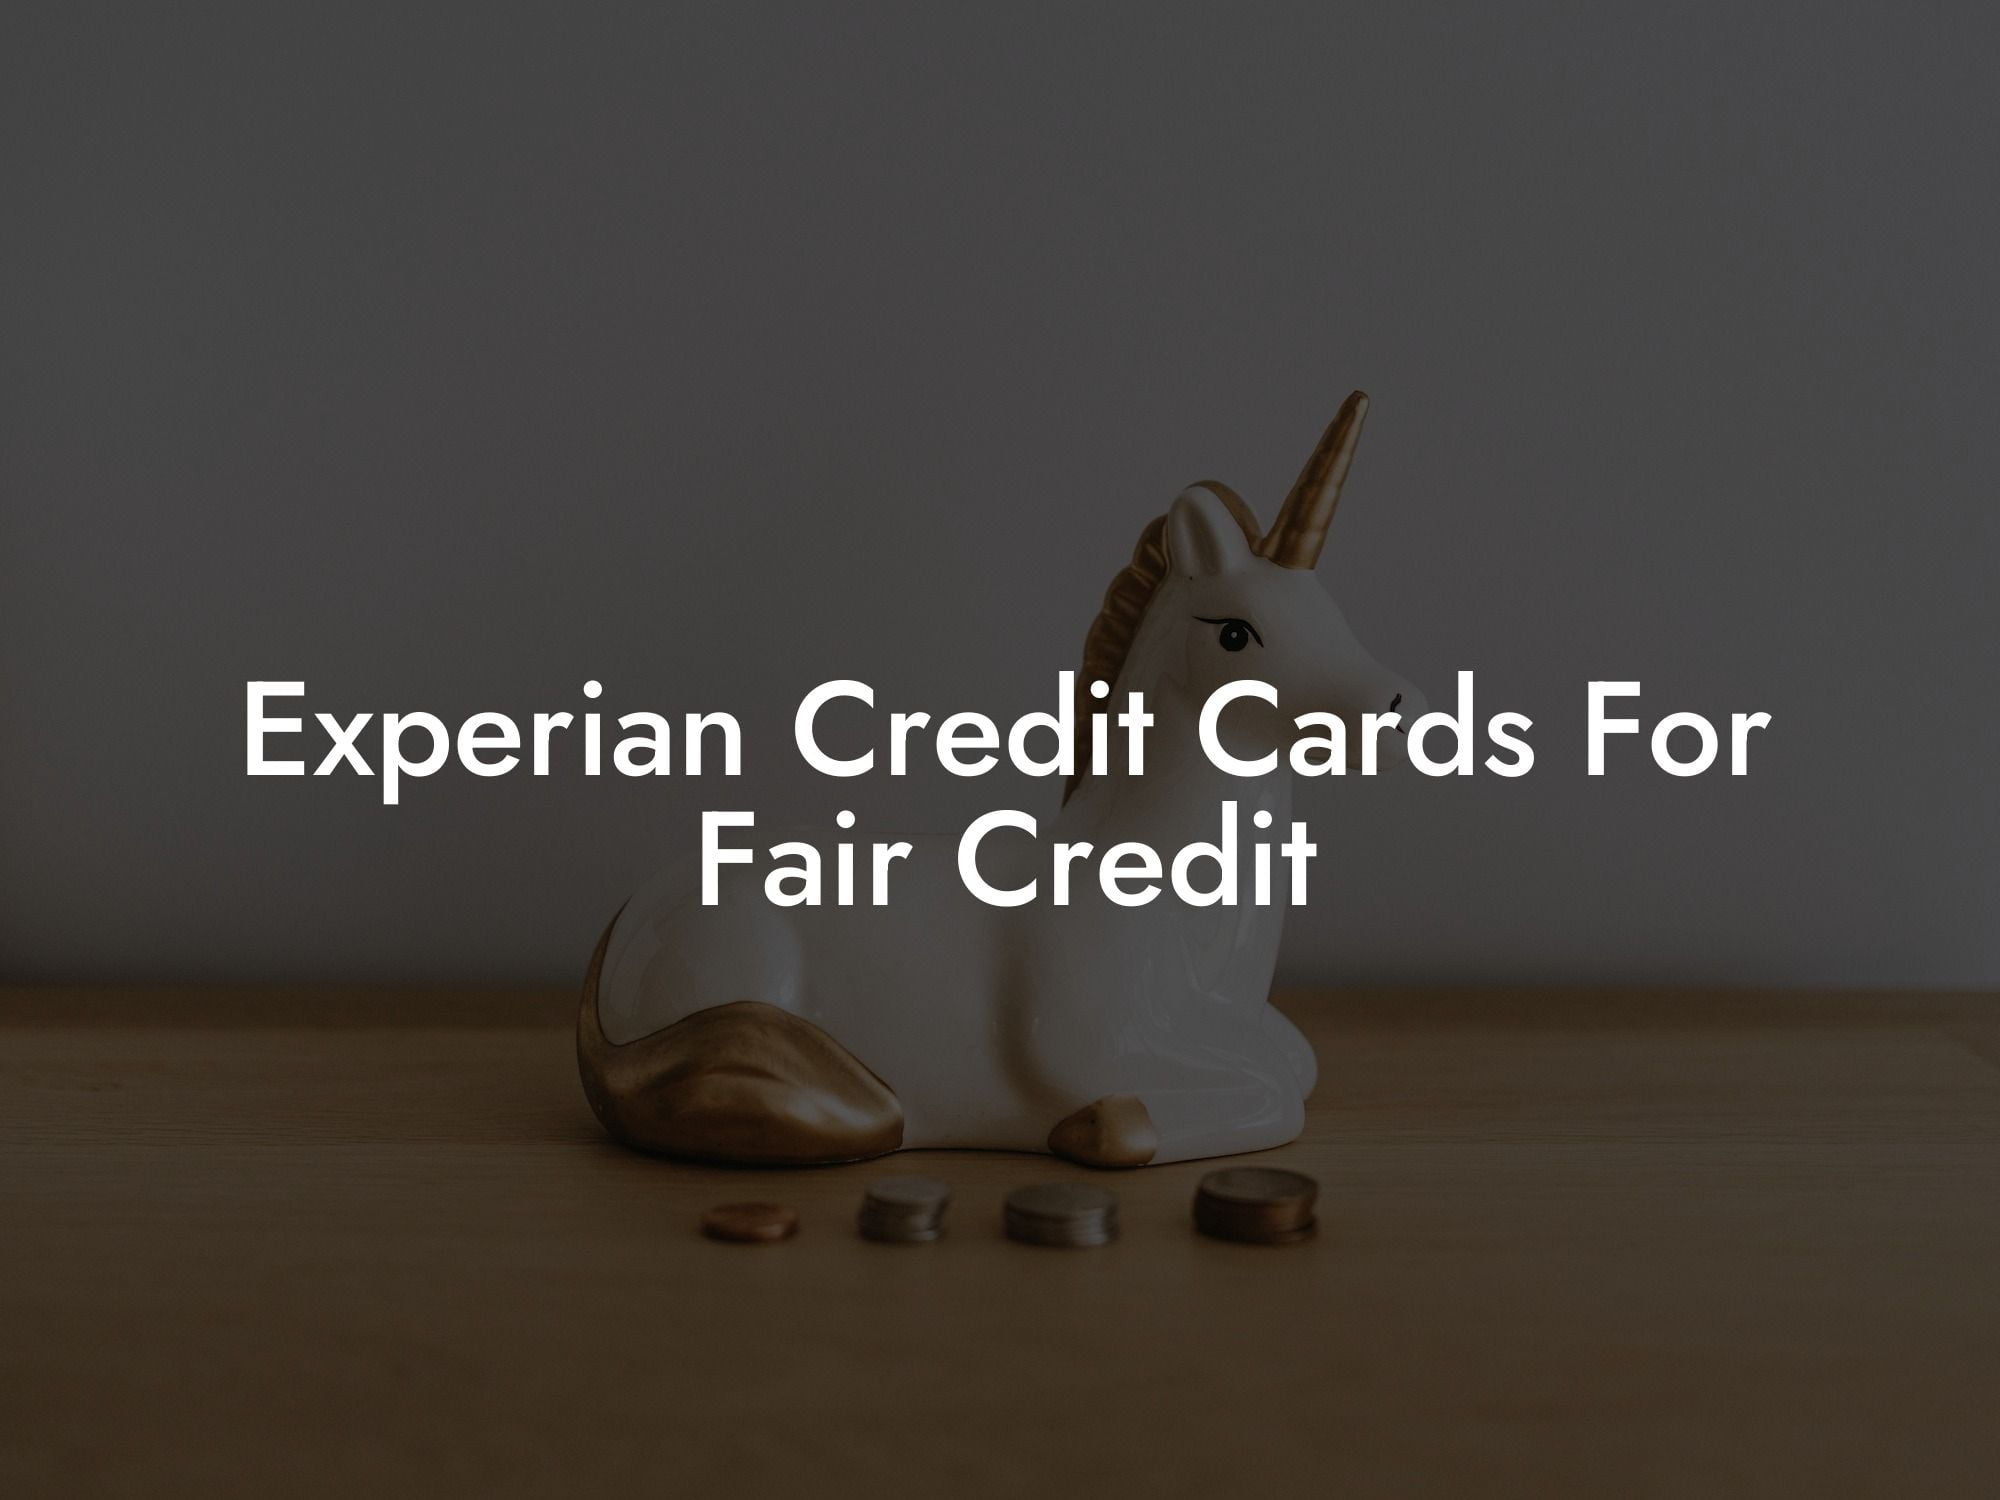 Experian Credit Cards For Fair Credit